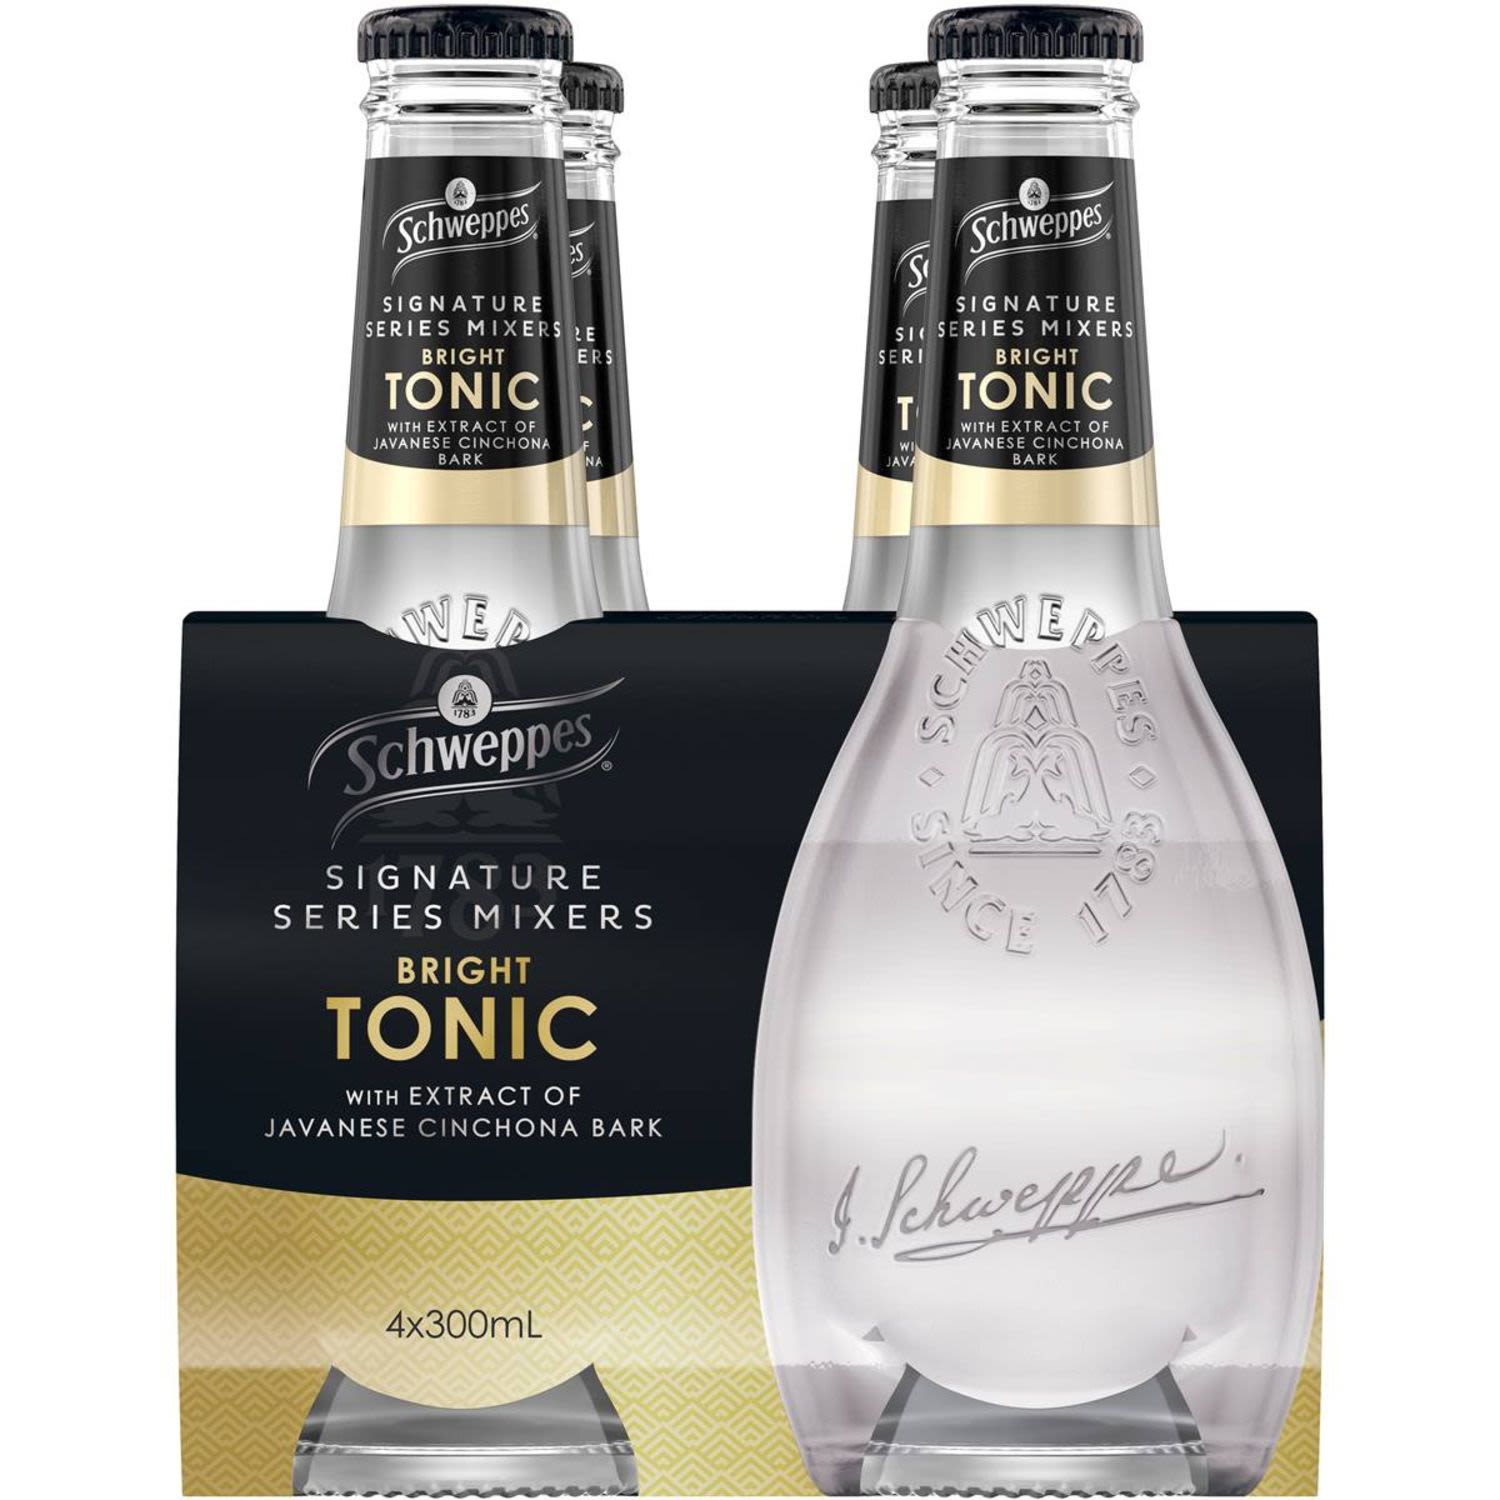 Schweppes Signature Series Mixers Bright Tonic 300ml, 4 Each